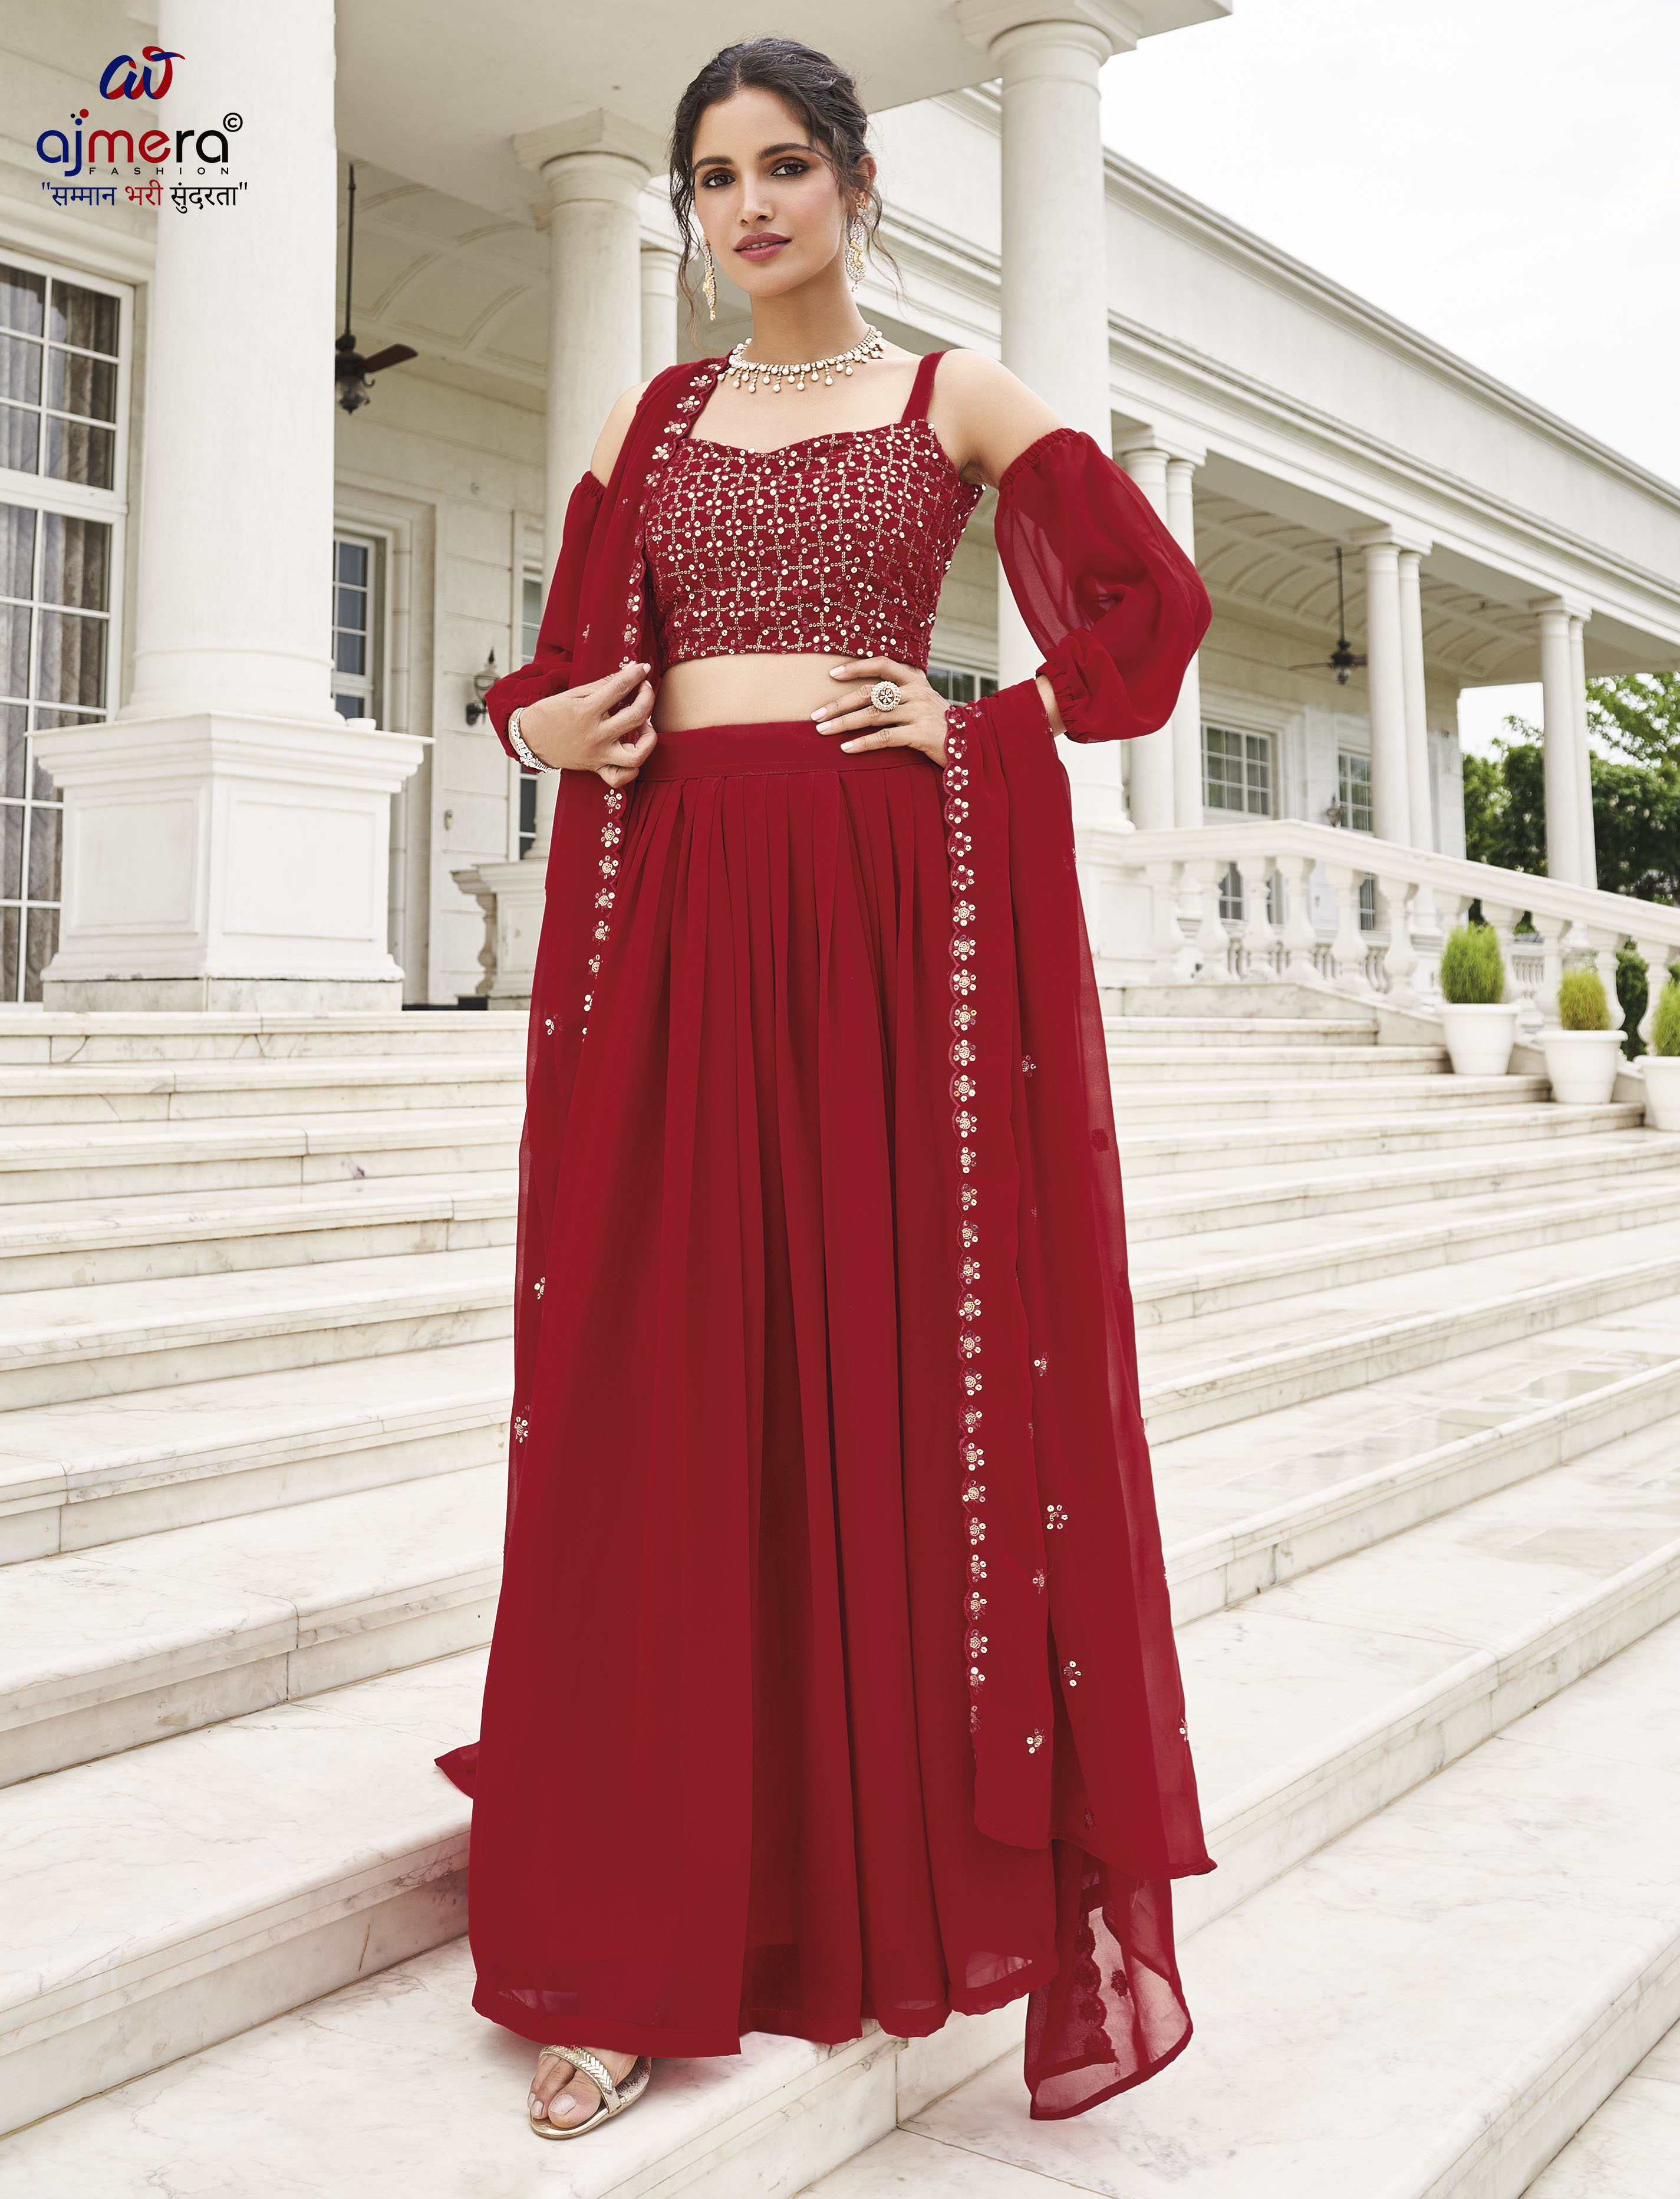 Partywear Lahenga Manufacturers, Suppliers in Rajasthan